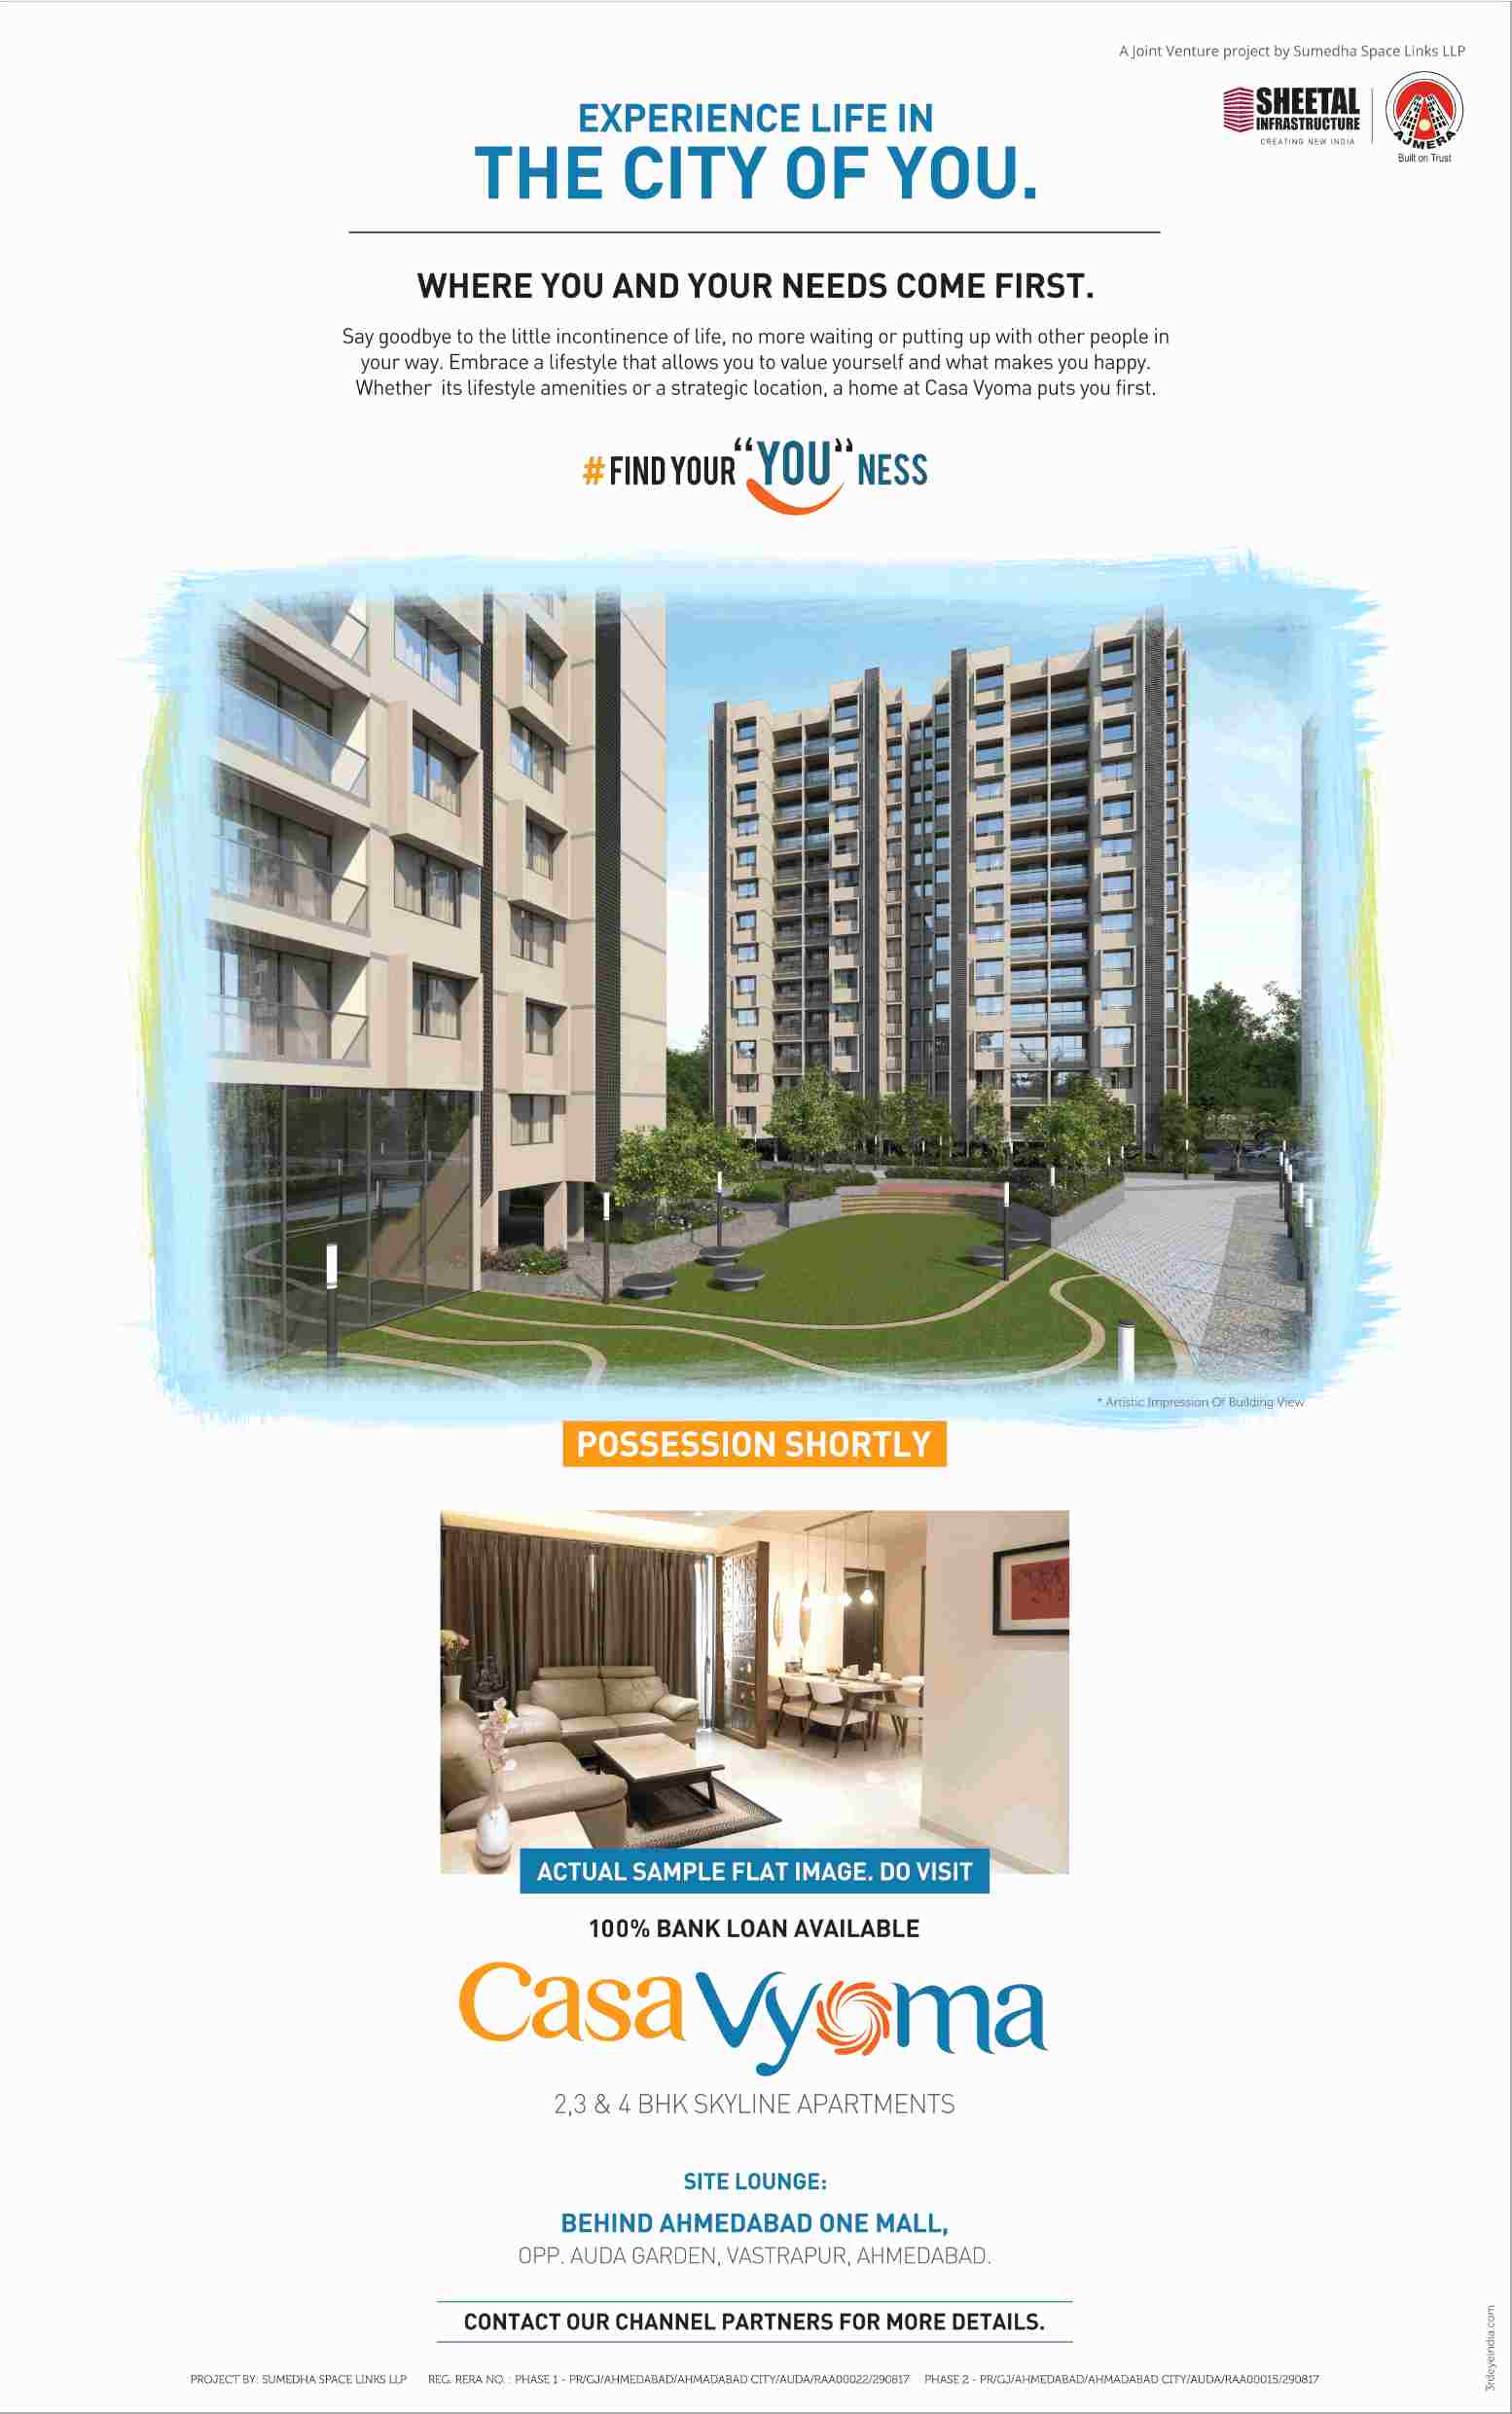 Live in homes where you and your needs come first at Sheetal Casa Vyoma in Ahmedabad